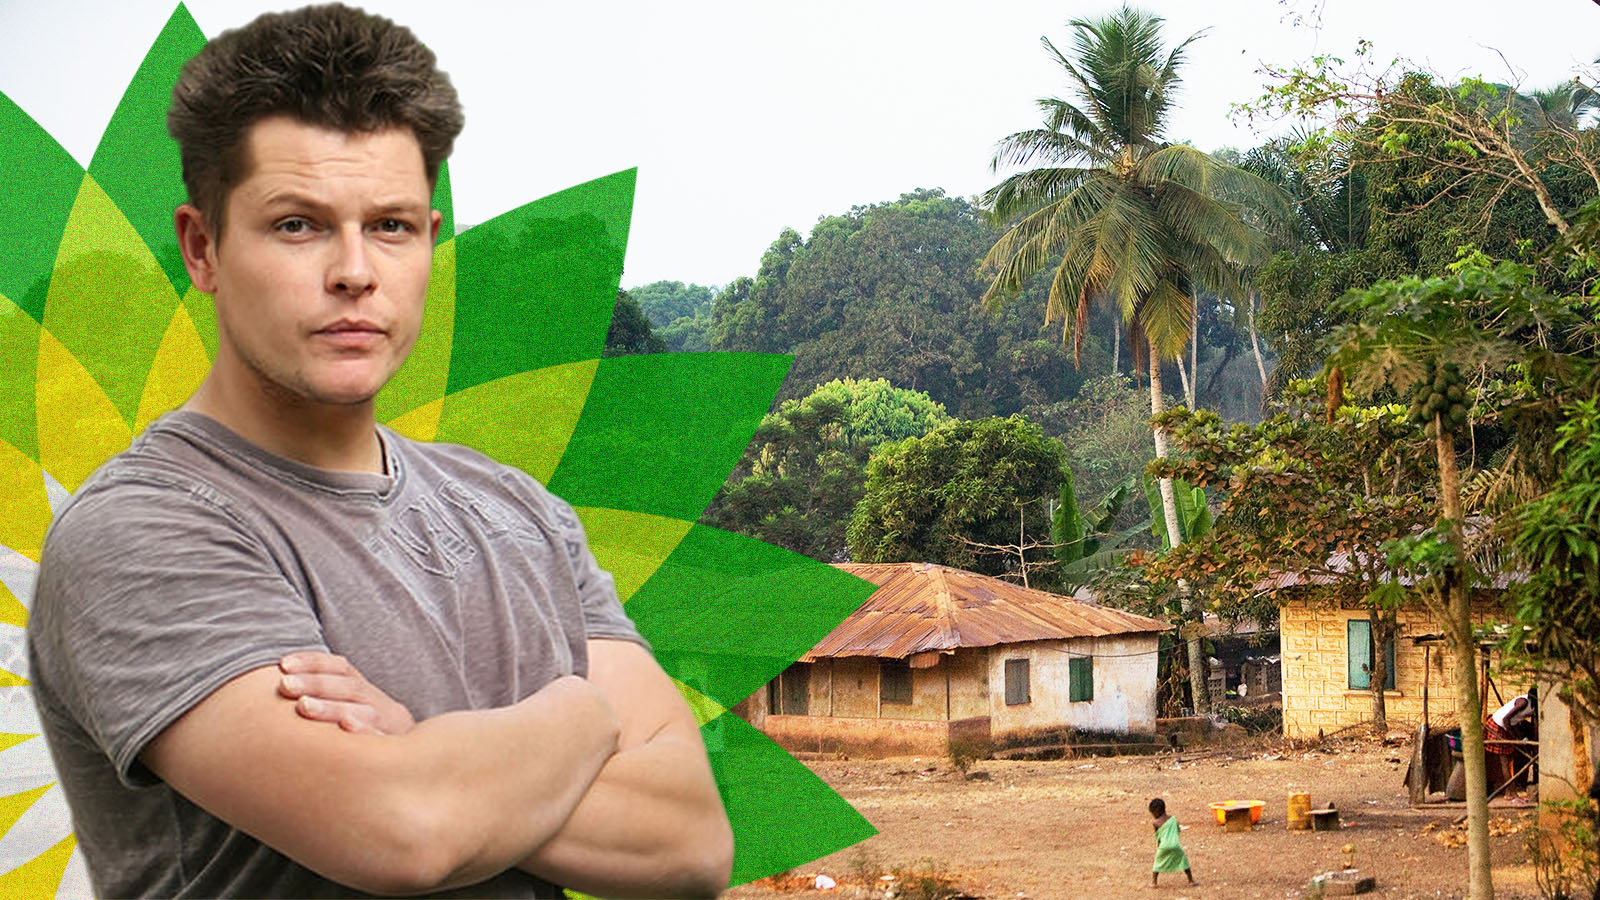 Carbon Done Right, whose president is the former soldier Kevin Godlington, will use a “proprietary tech system” to monitor the replanting of the rainforest in Sierra Leone. It has received a $2.5 million commitment from BP